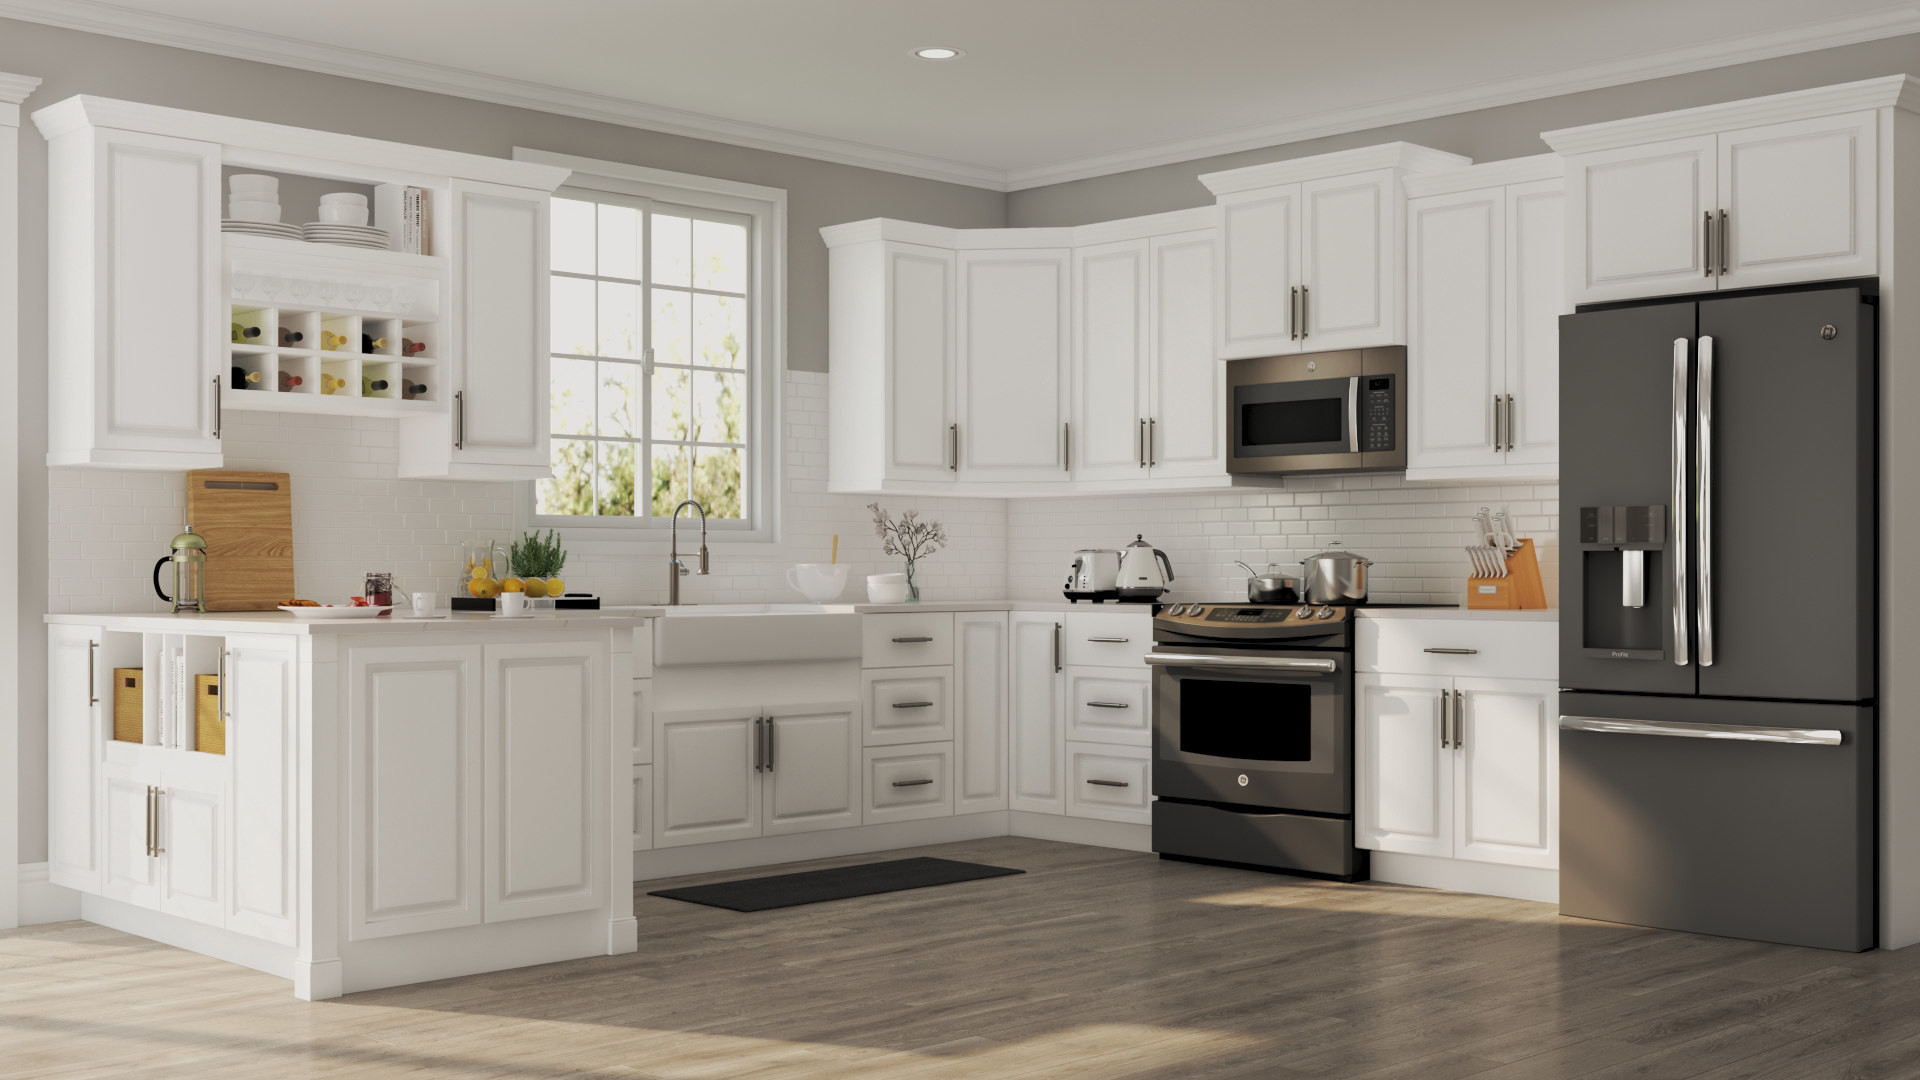 Kitchen Wall Units
 Hampton Wall Cabinets in White – Kitchen – The Home Depot